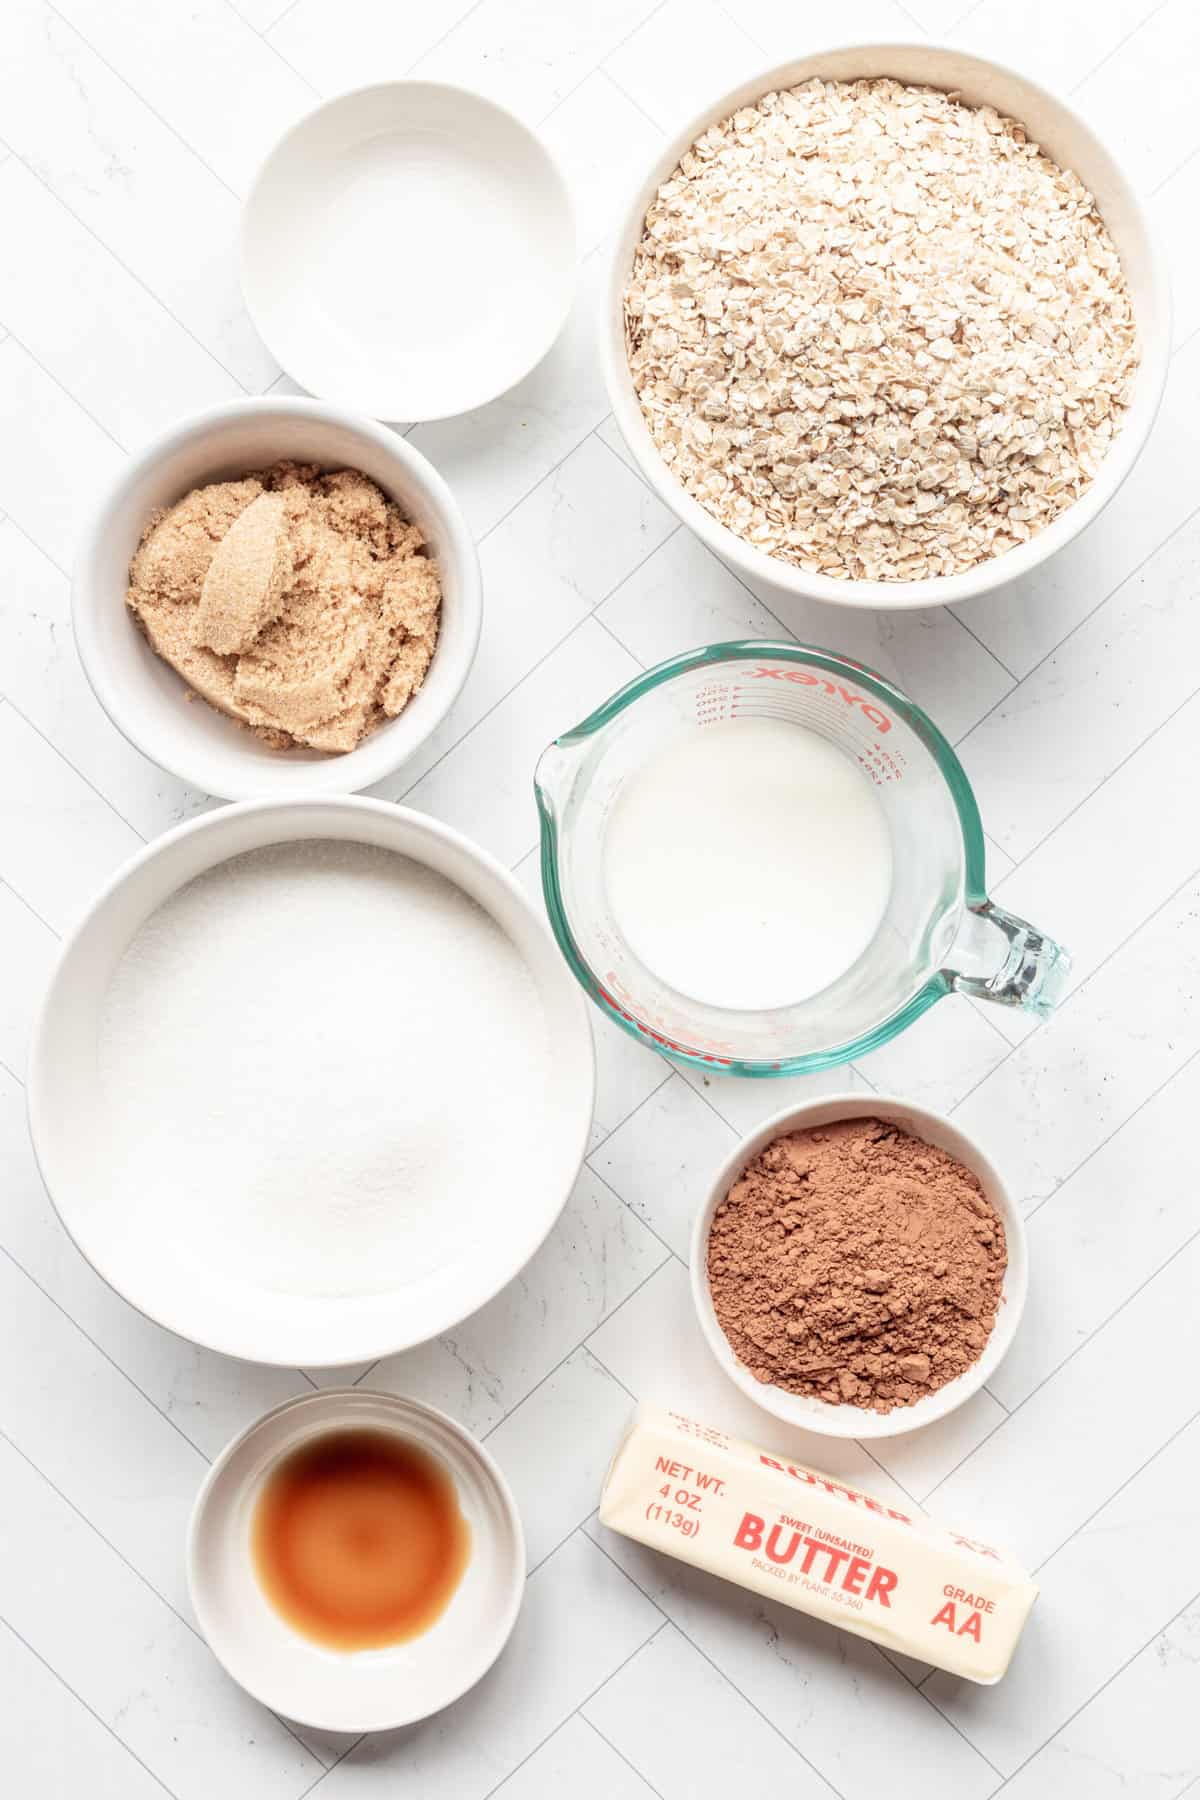 ingredients to make no bake cookies without peanut butter